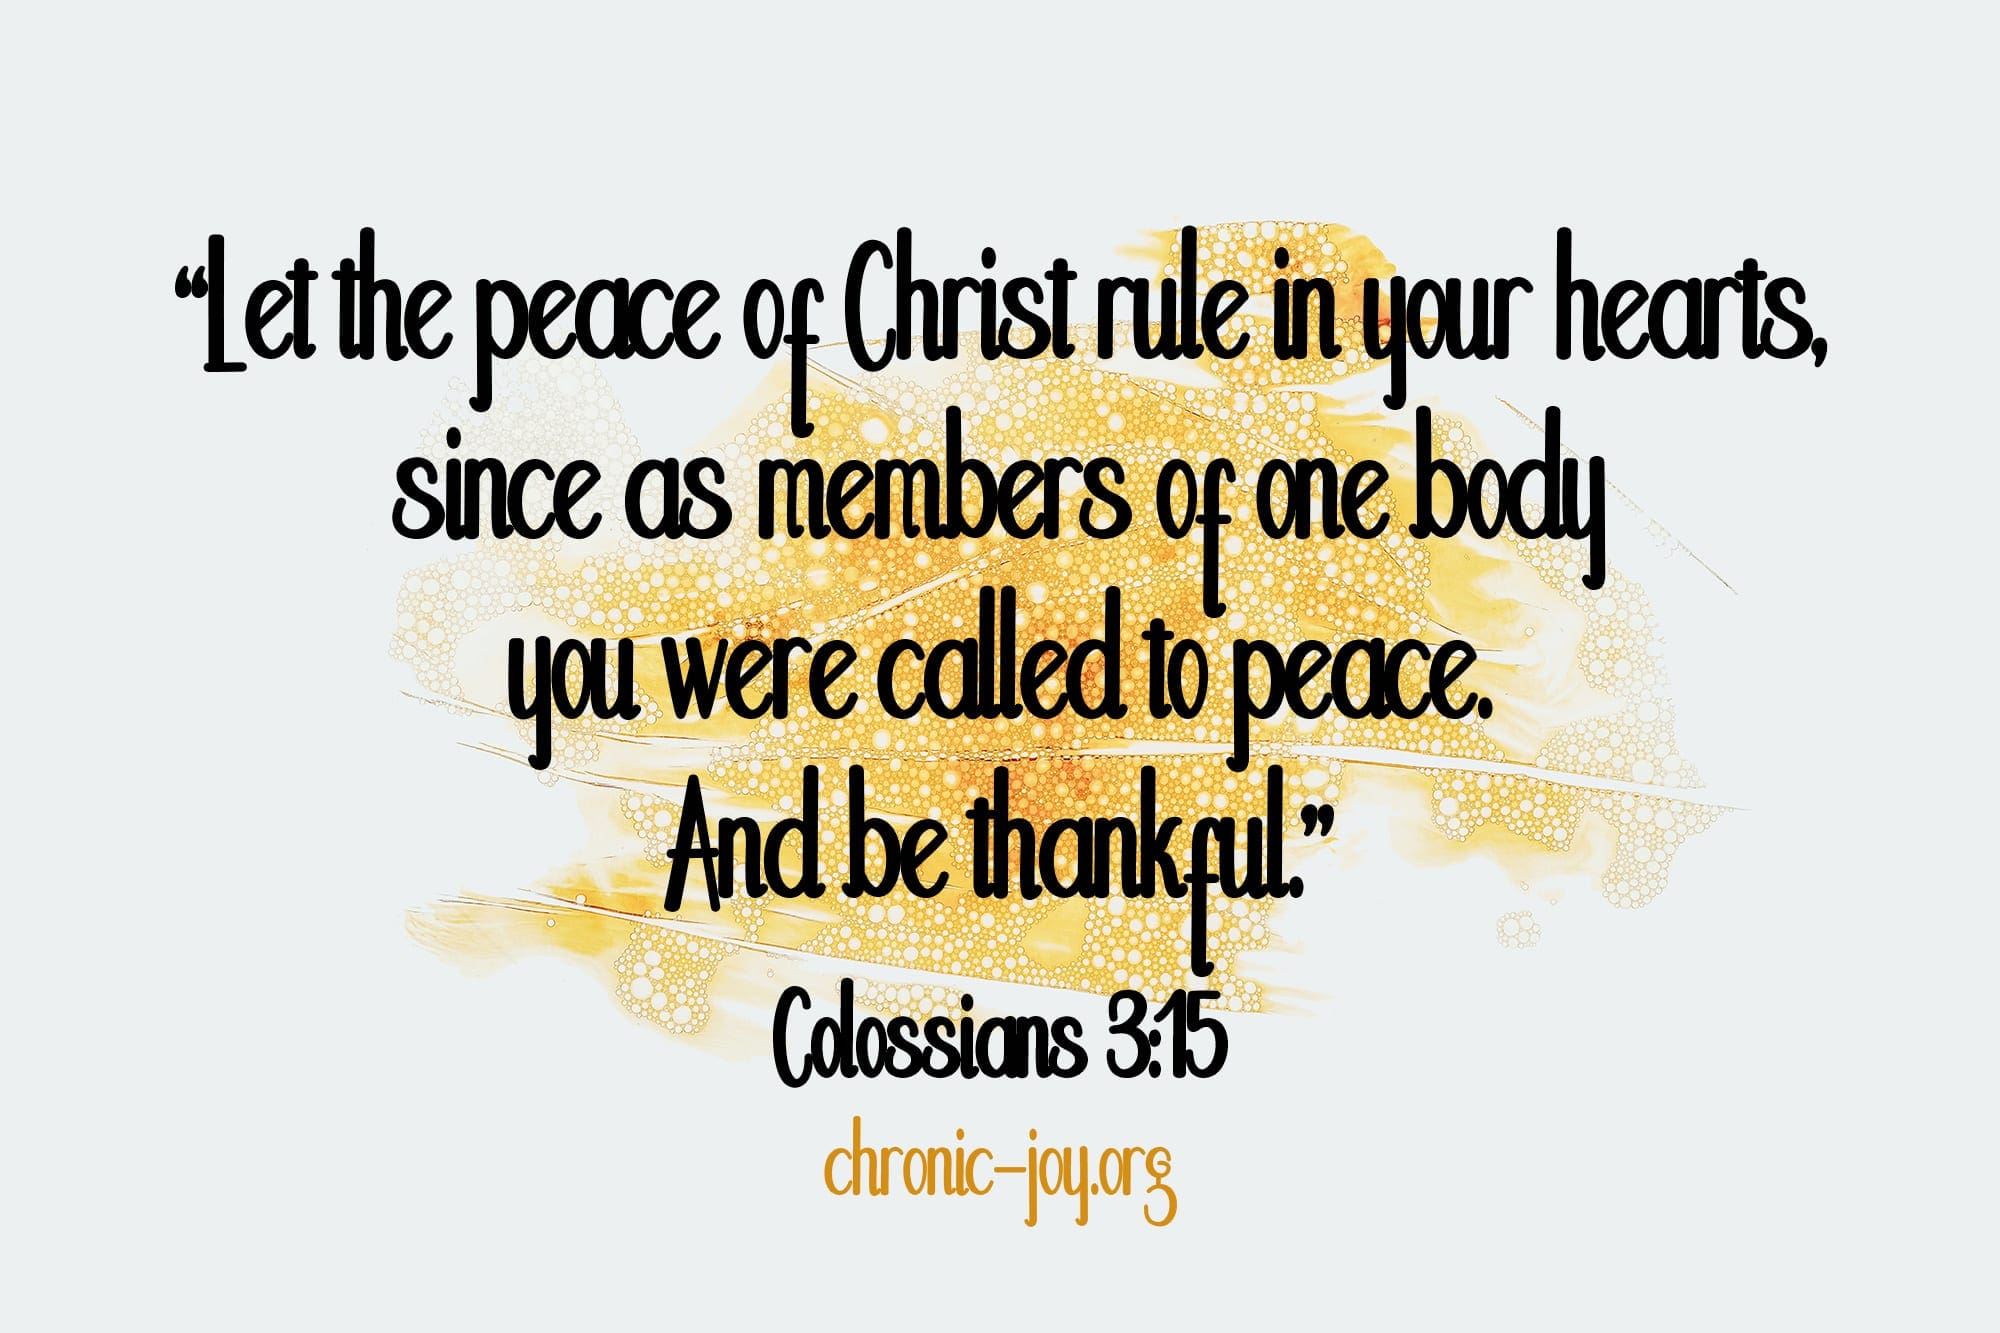 "Let the peace of Christ rule in your hearts, since as members of one body you were called to peace. And be thankful." Colossians 3:15